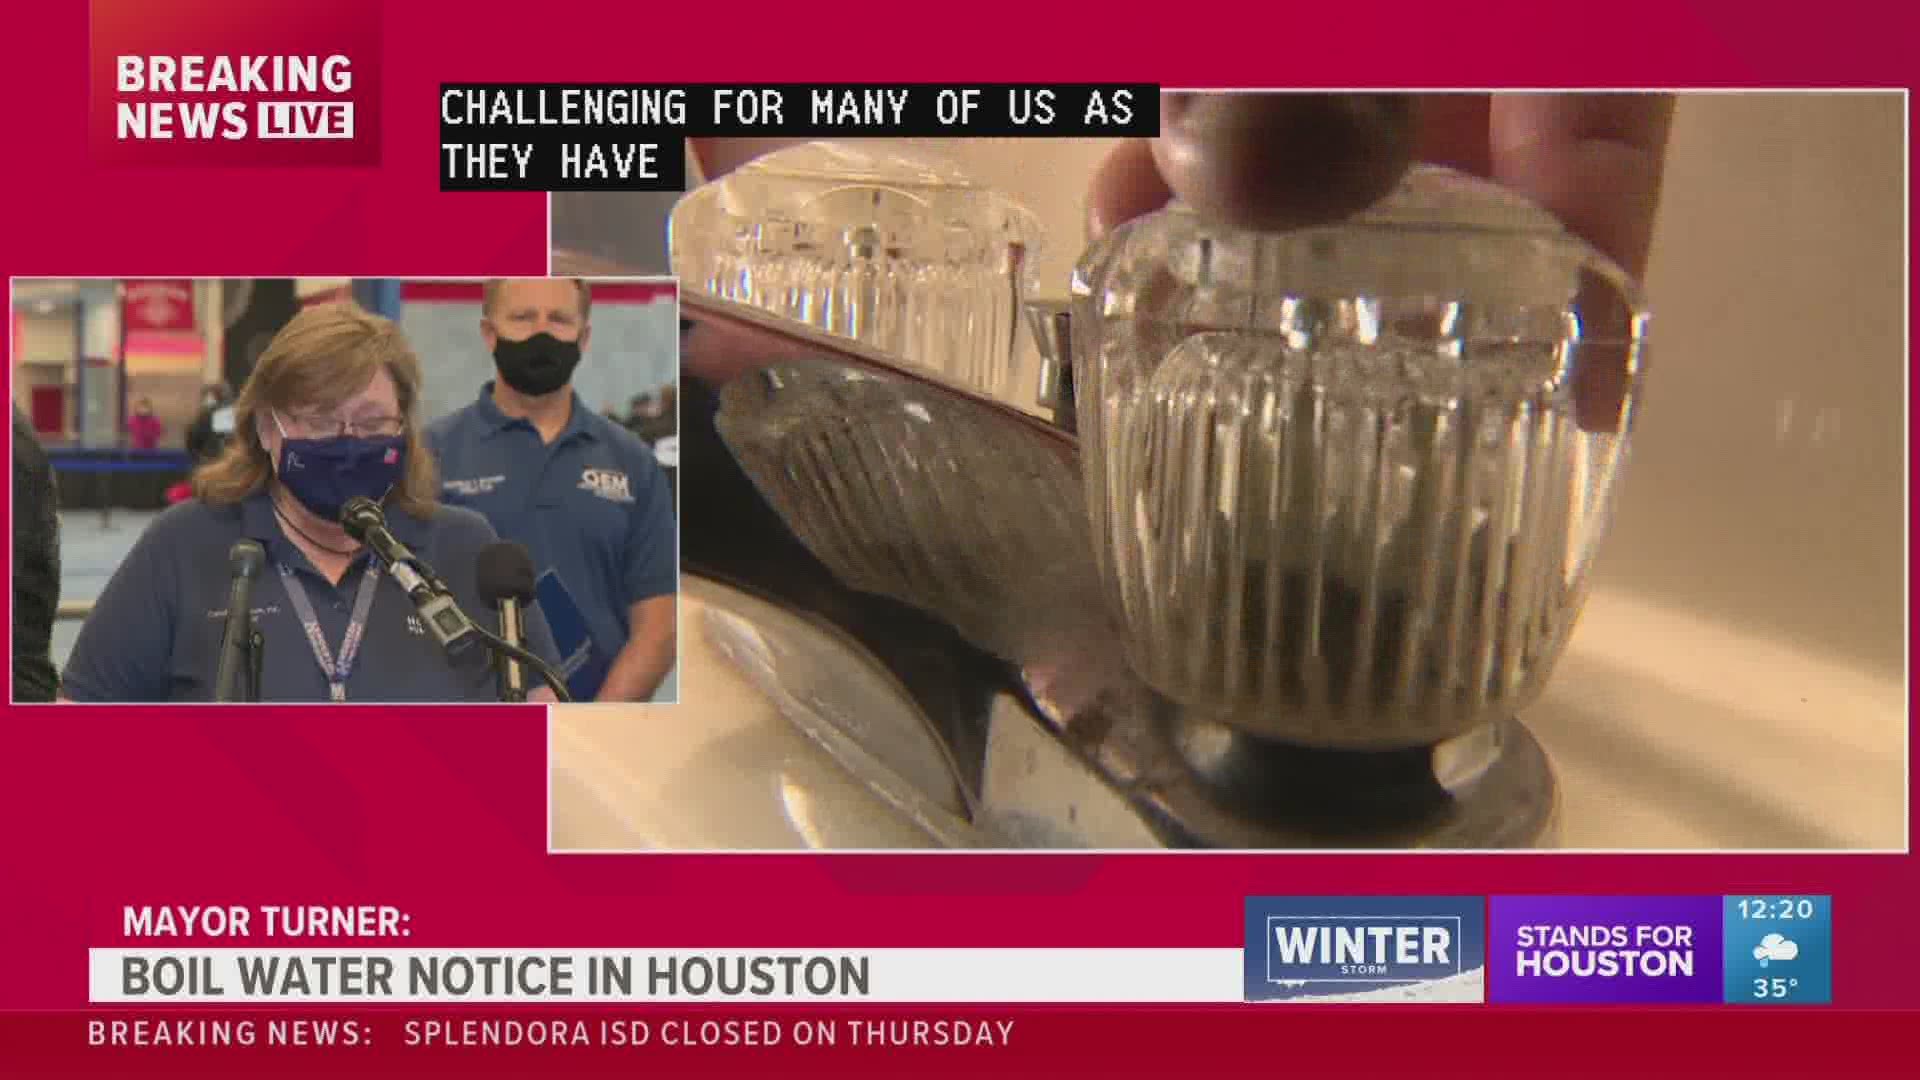 City officials gave an update on the boil water notice for the City of Houston.